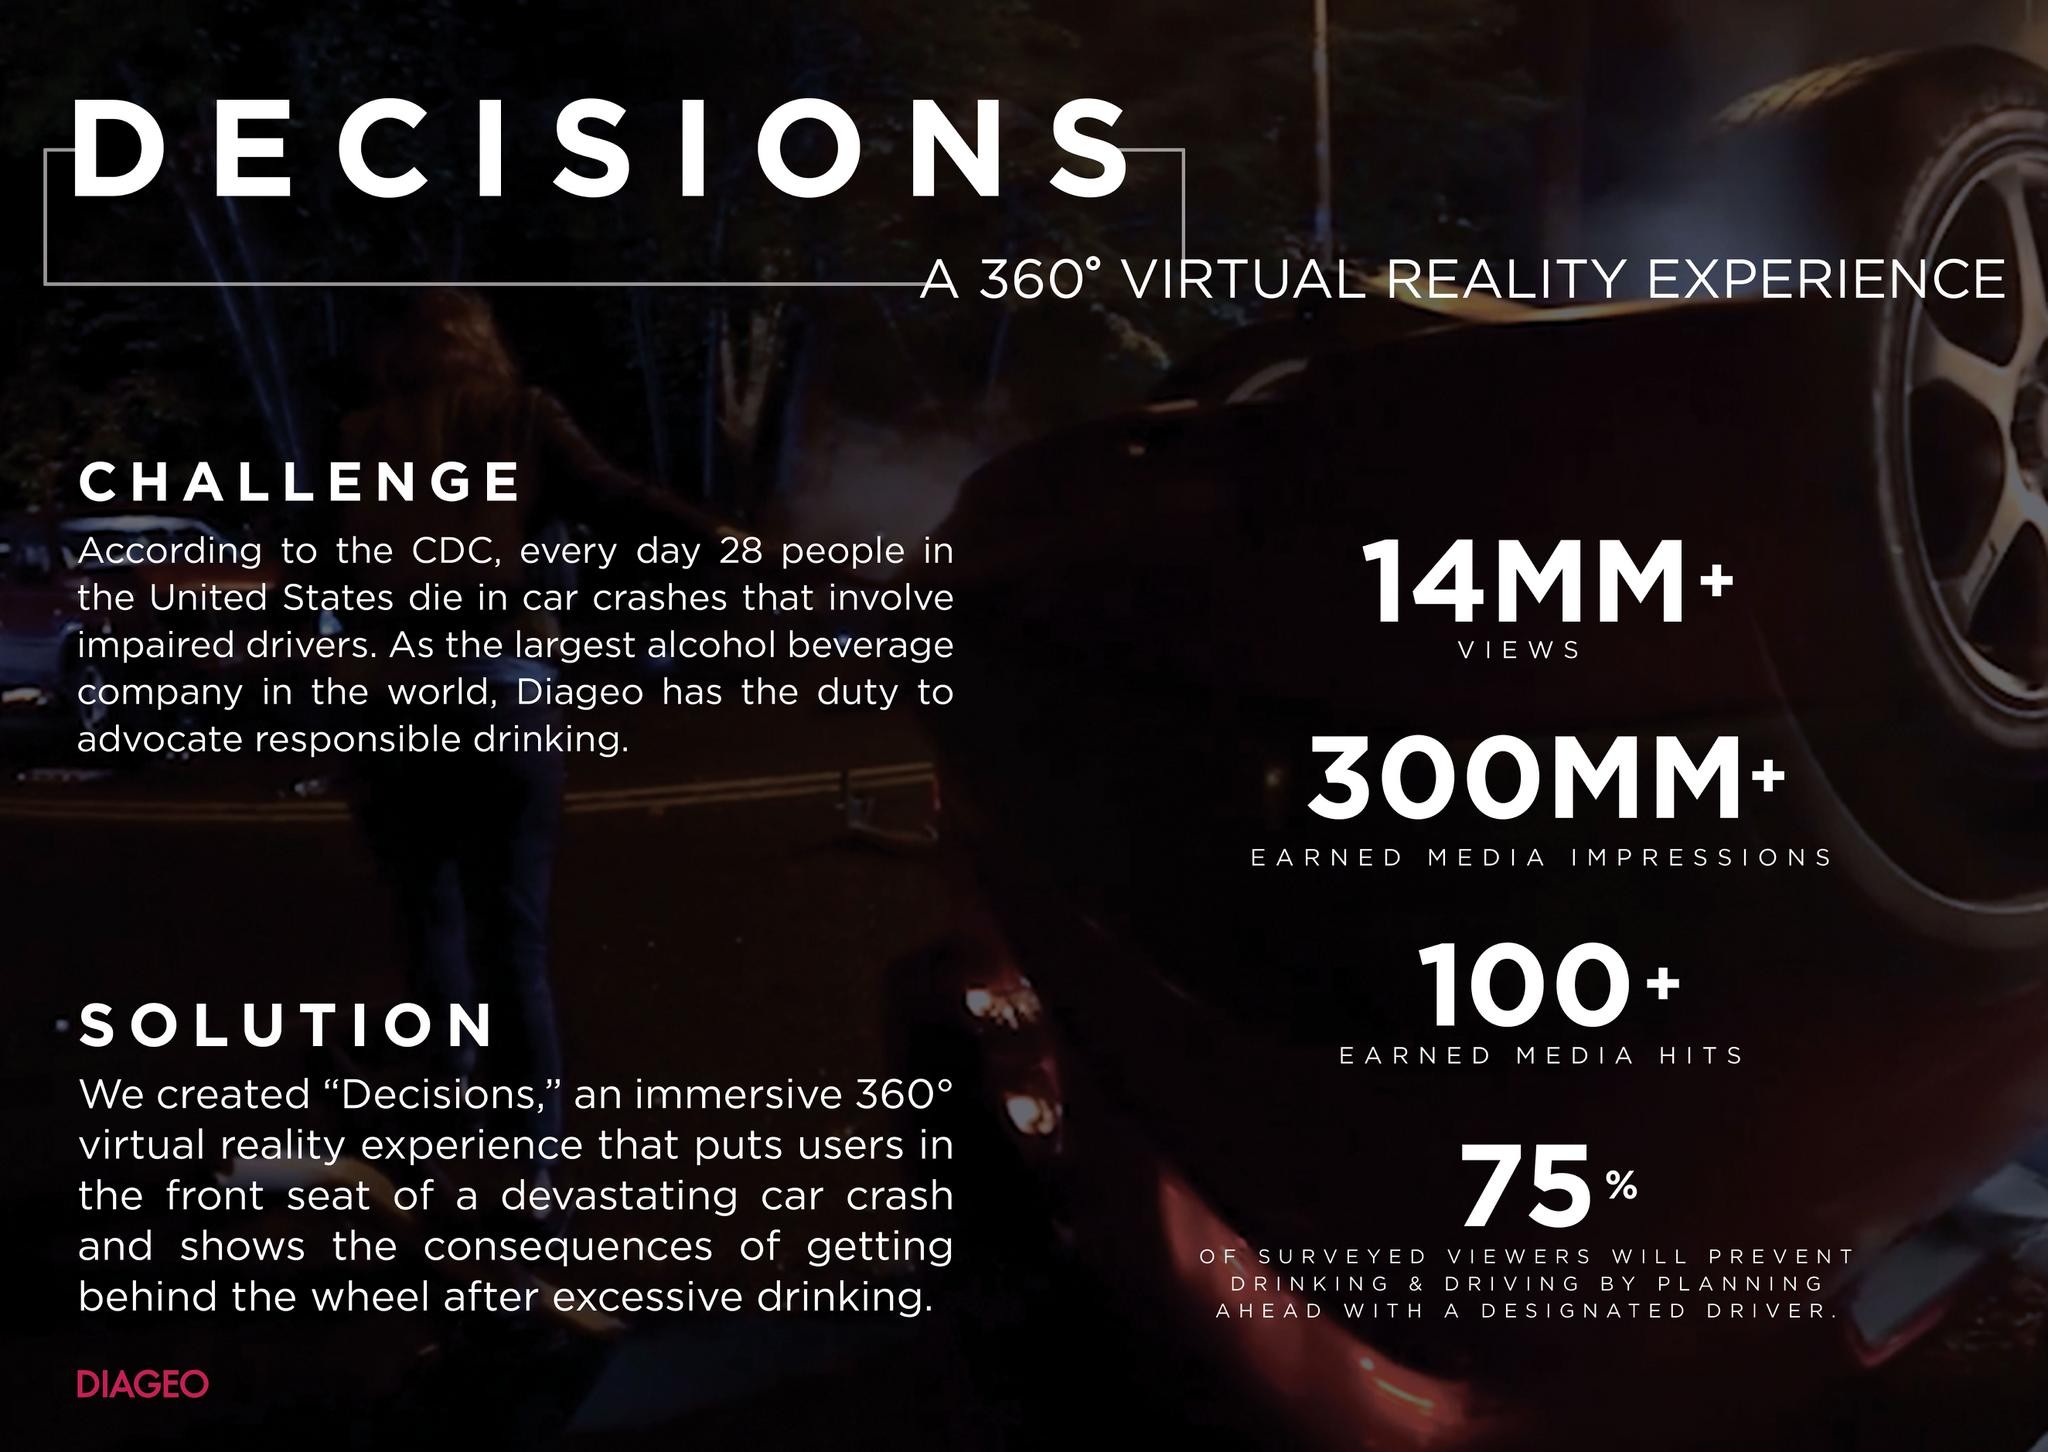 DECISIONS: a 360° Virtual Reality Experience